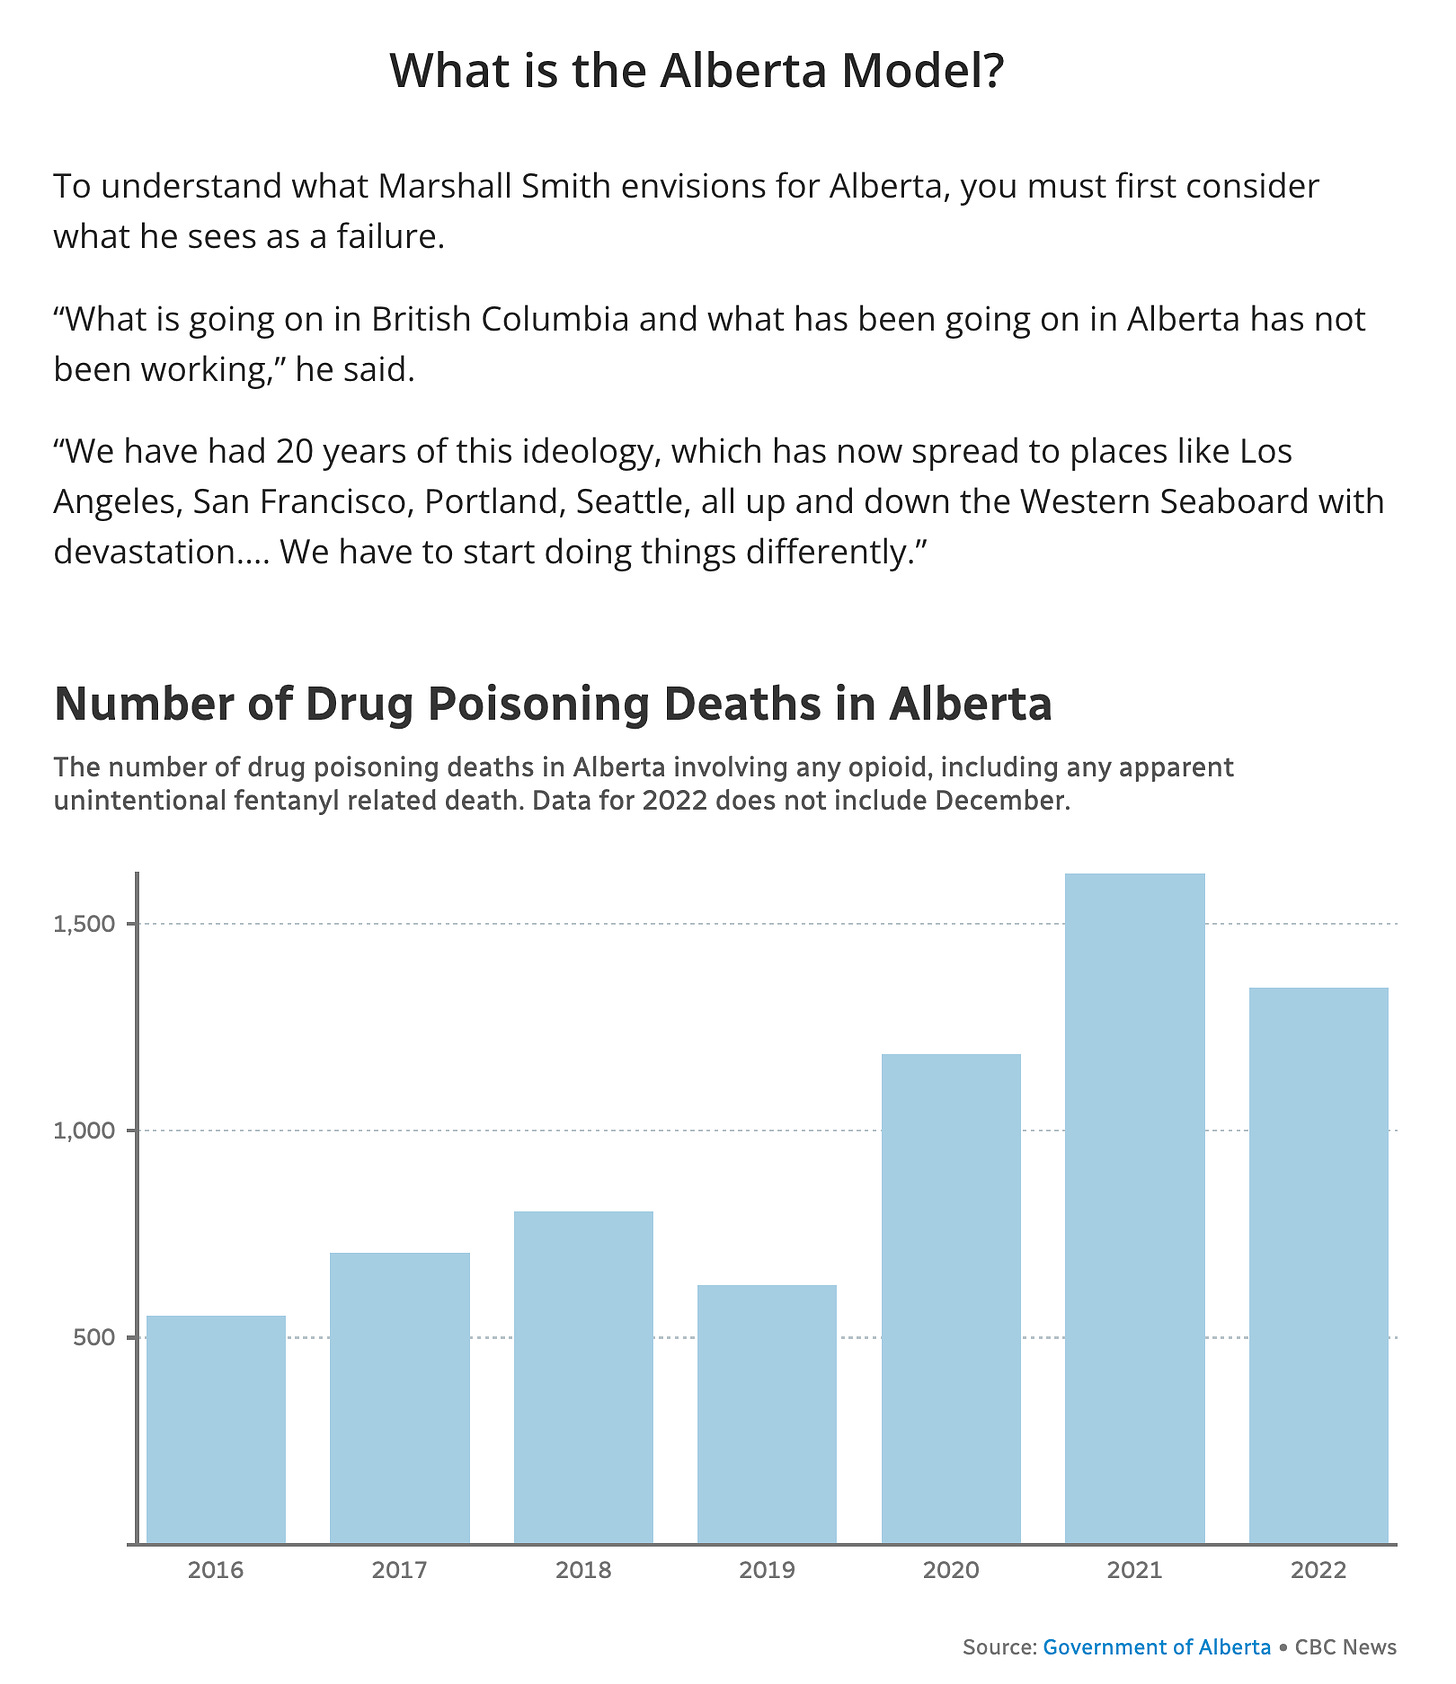 CBC article with a section heading what is the Alberta model? It is then followed by some propaganda from Marshall Smith, followed by a graph that Miss reports the actual drug poisoning deaths in Alberta by only showing opioid toxicities and omitting December data as well as updated data following medical examiner updates. The true number for 2022 is much closer to 1600 deaths